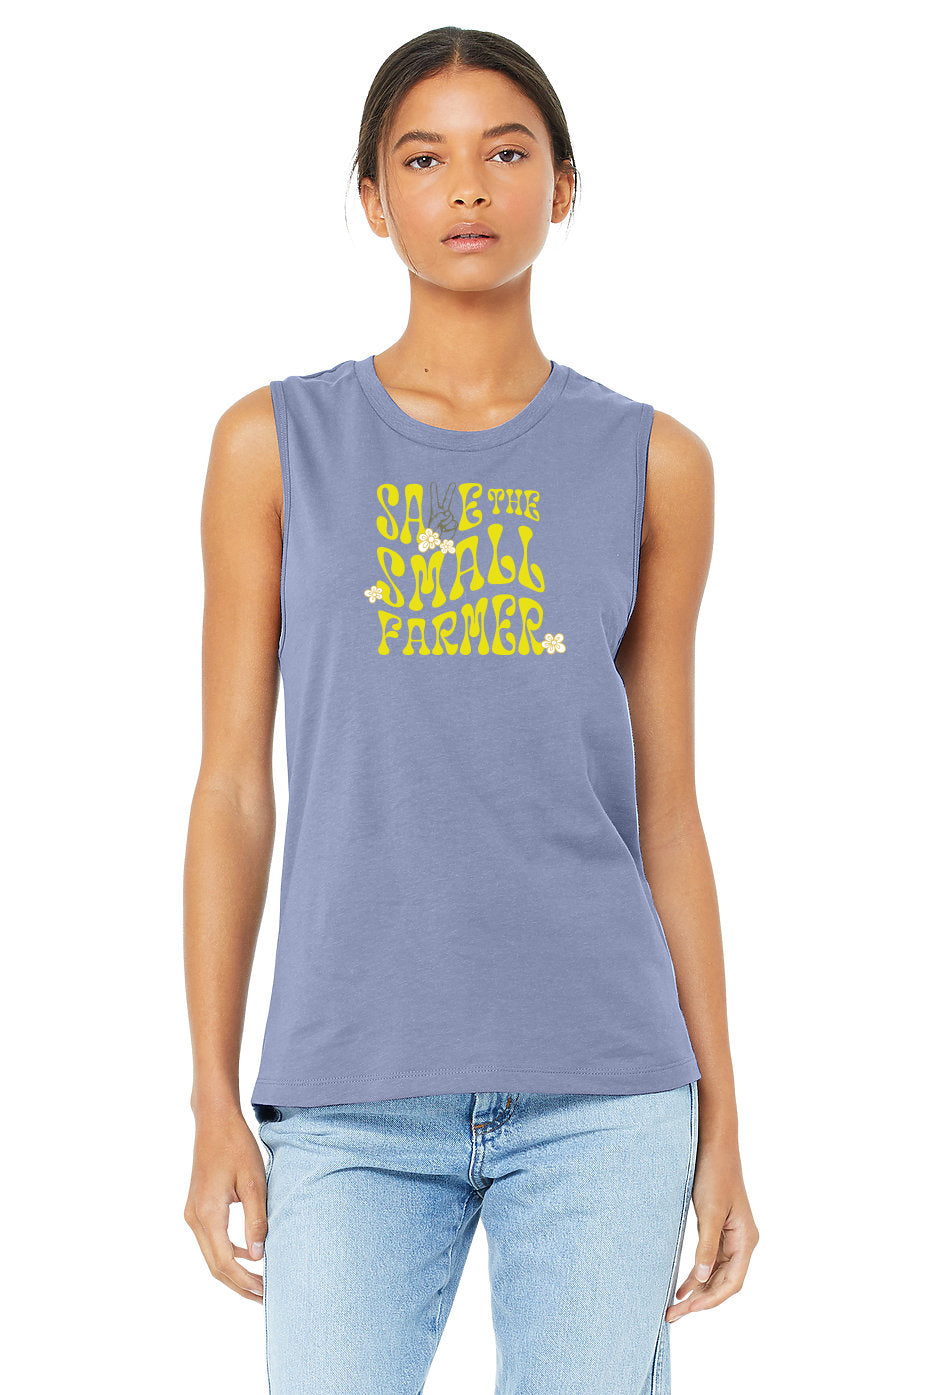 WWF "Save the small farmer" | Women's Muscle Tank | Lavender Blue